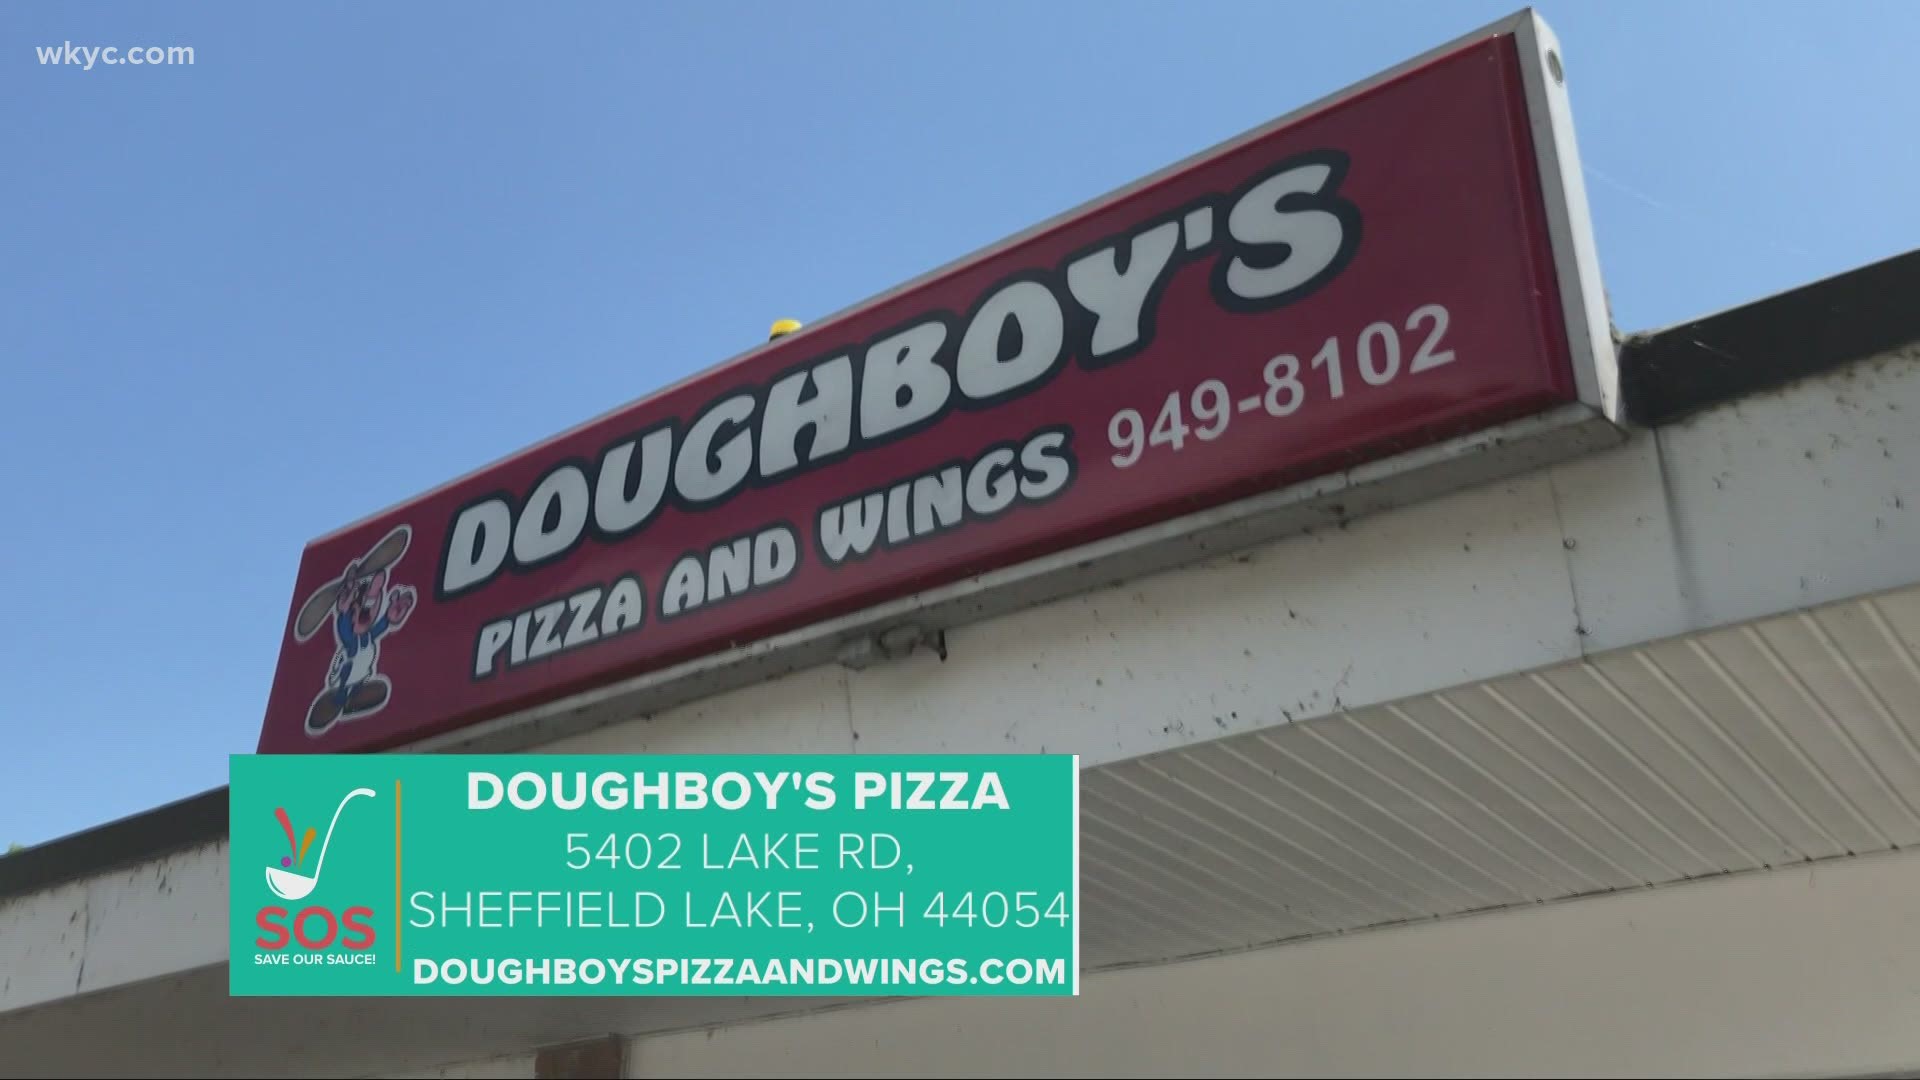 We're highlighting Doughboy's Pizza in Sheffield Lake in the 'Save Our Sauce' campaign, which is being done to support Northeast Ohio restaurants amid the pandemic.